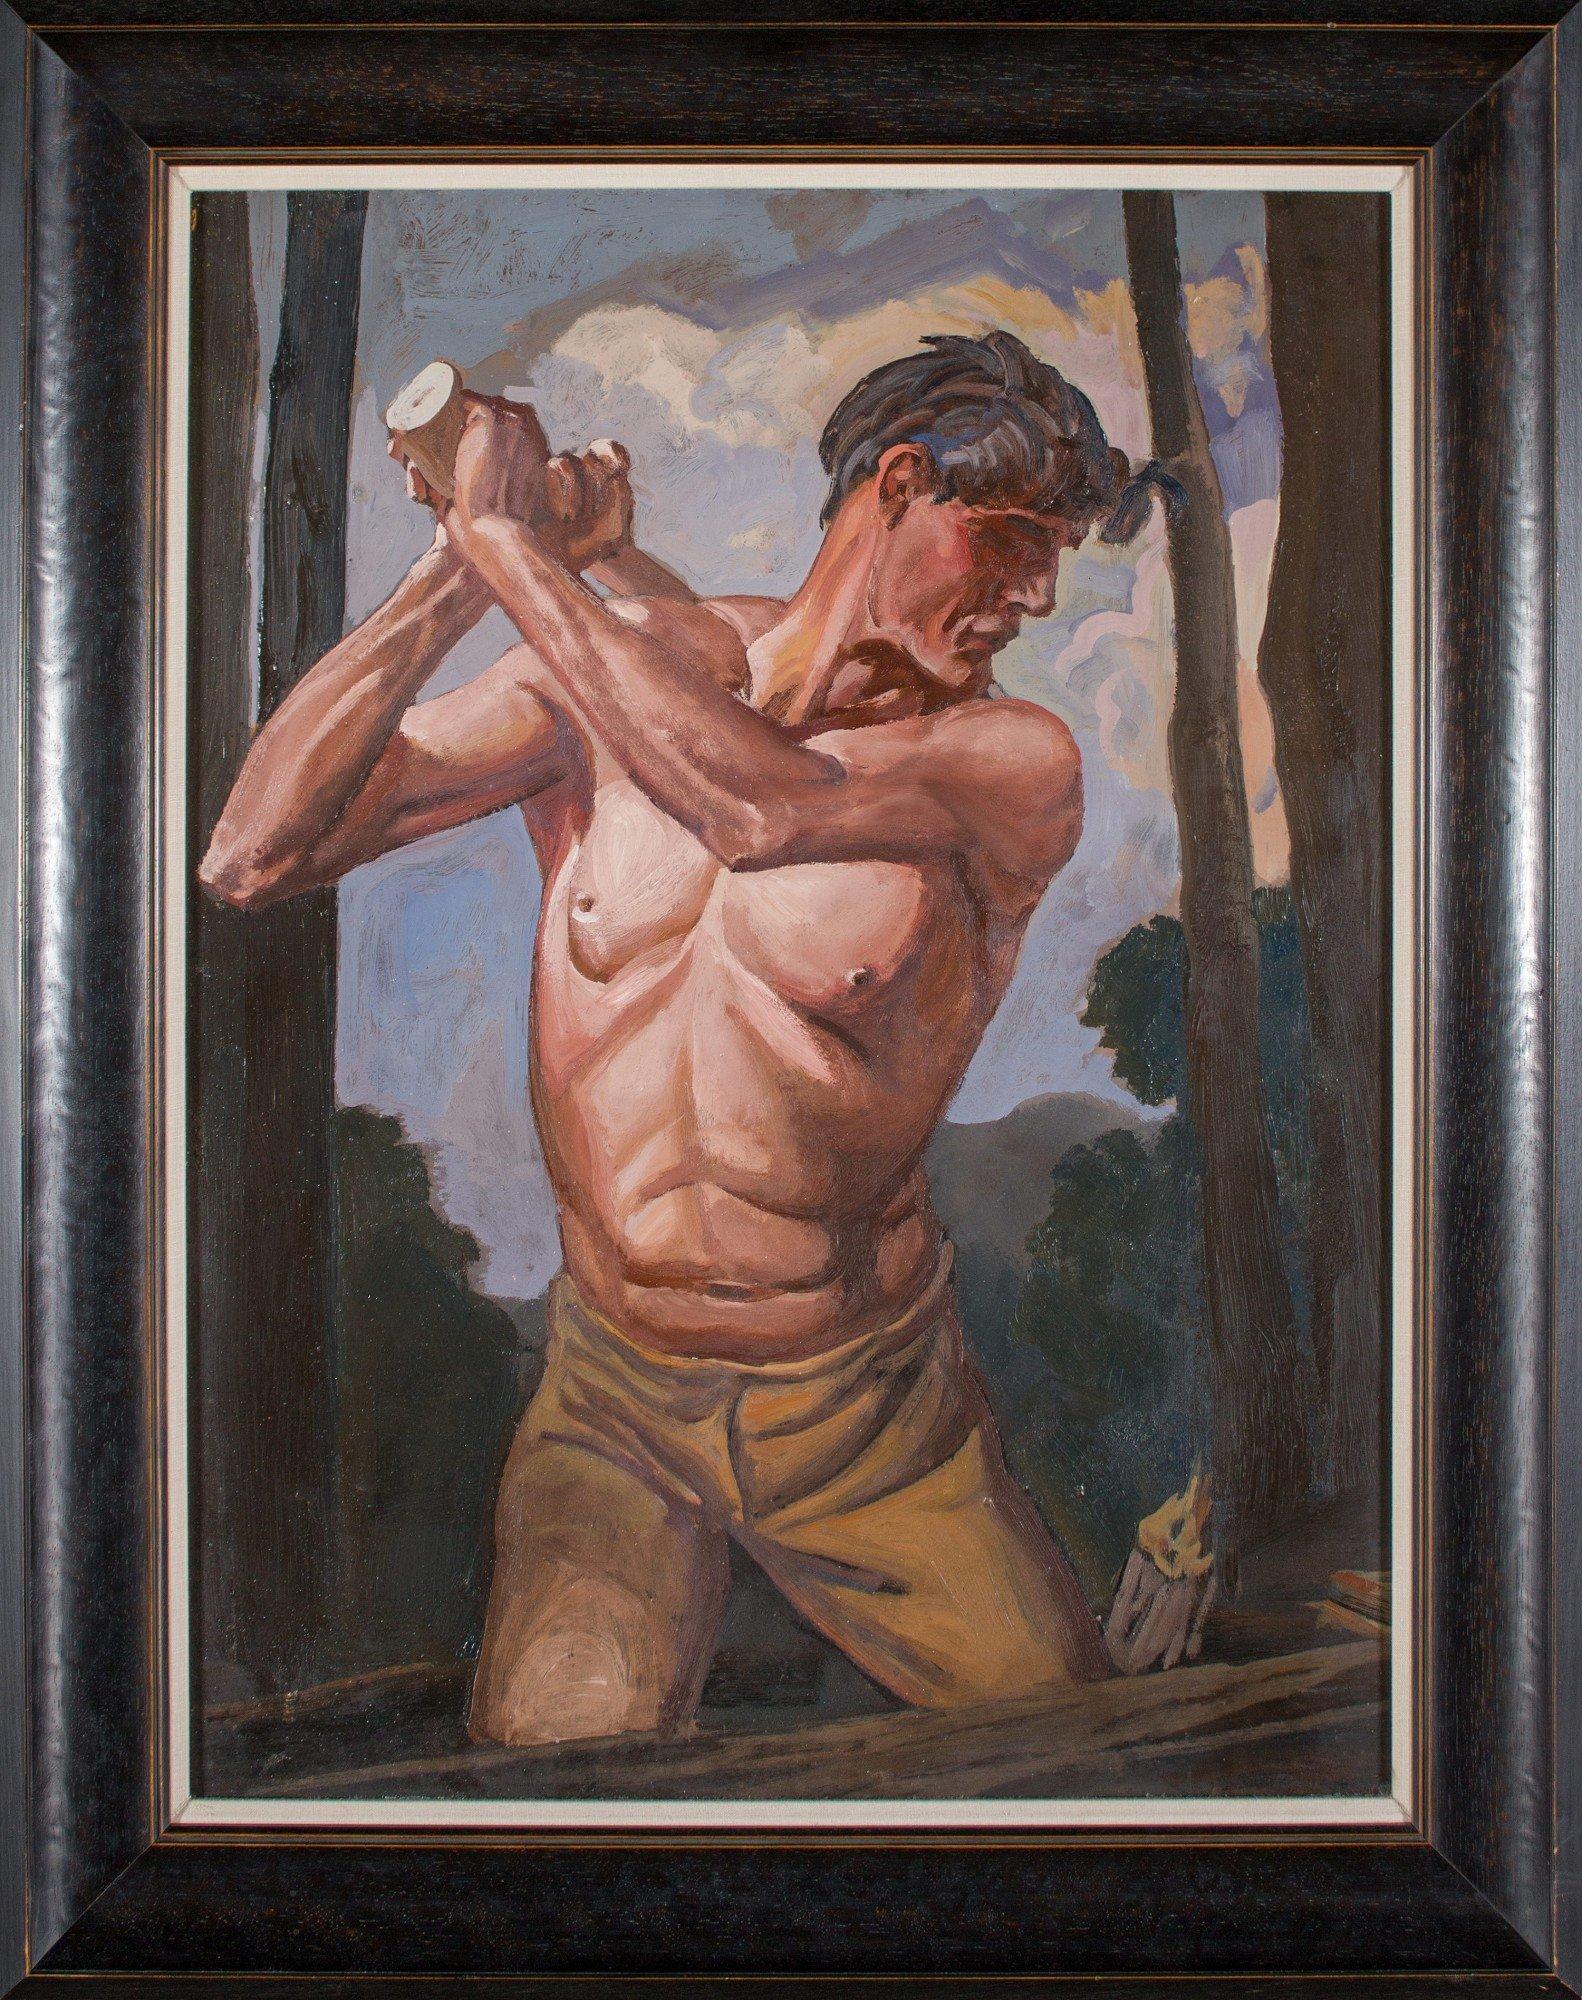 The Wood Chopper, Brecksville, Ohio, Early 20th Century Cleveland School - Painting by Frank Wilcox